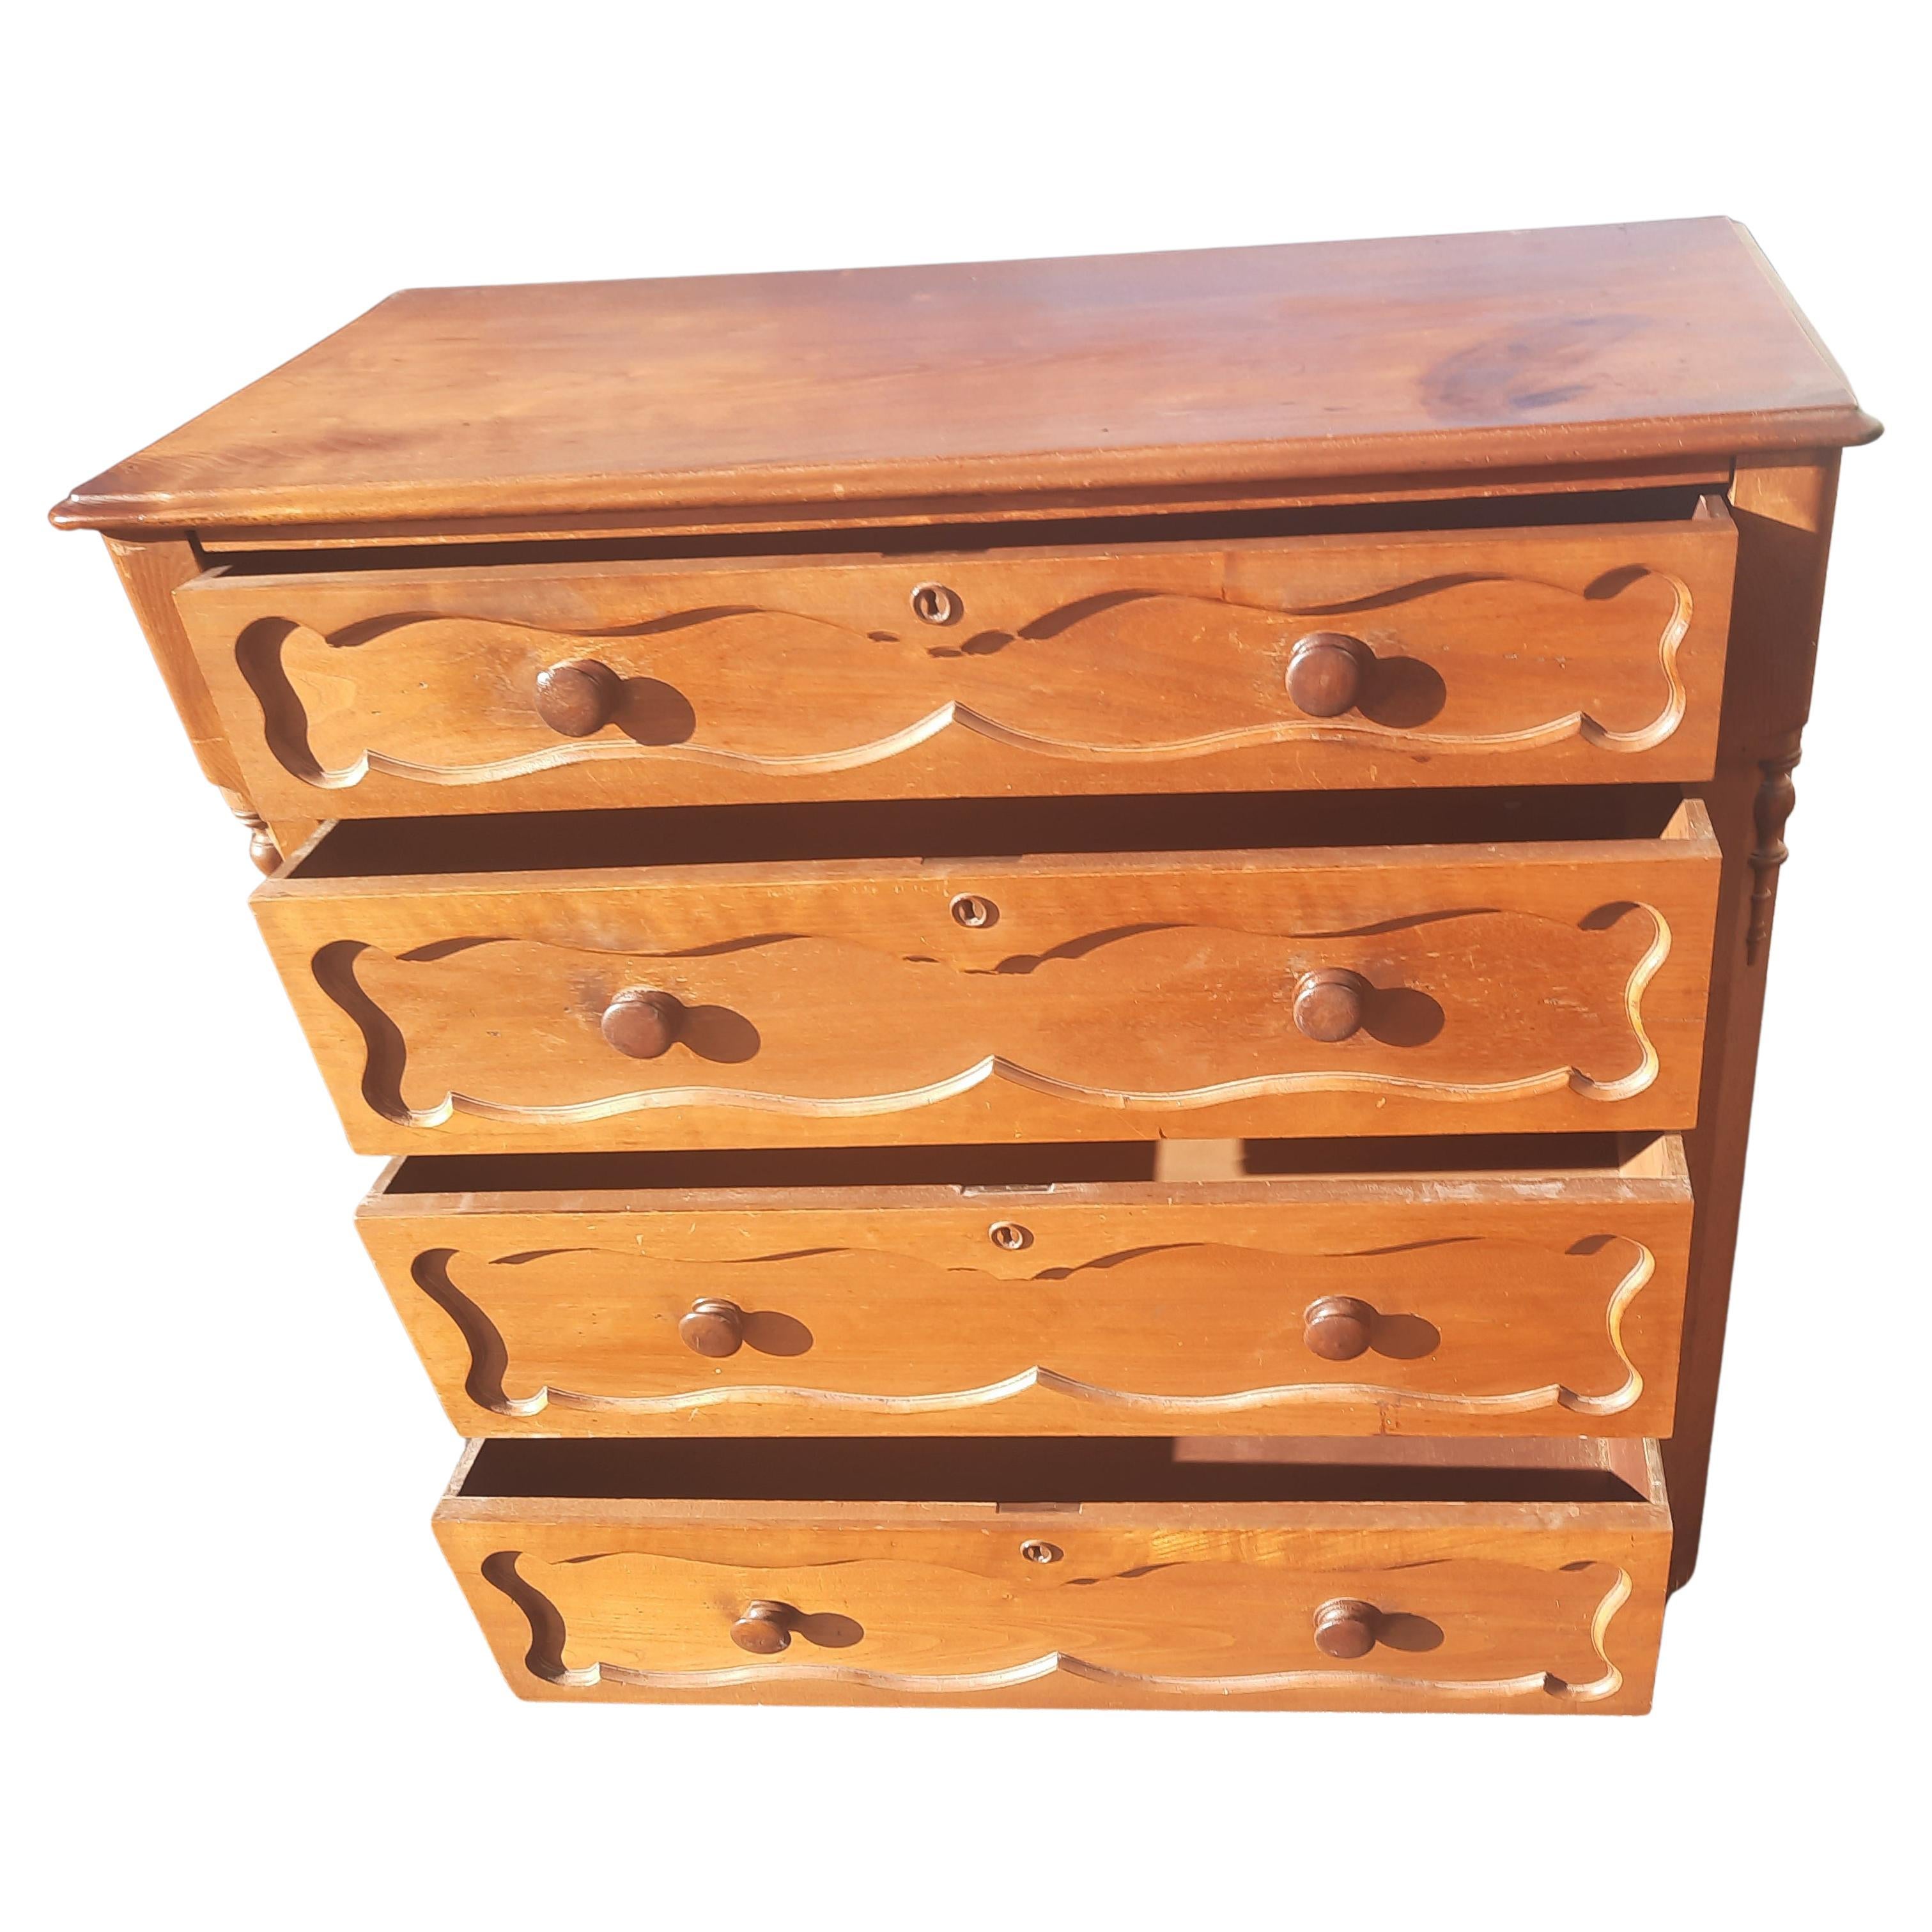 American Antique Edwardian Walnut Chest of Drawers on Wheels, circa 1920s For Sale